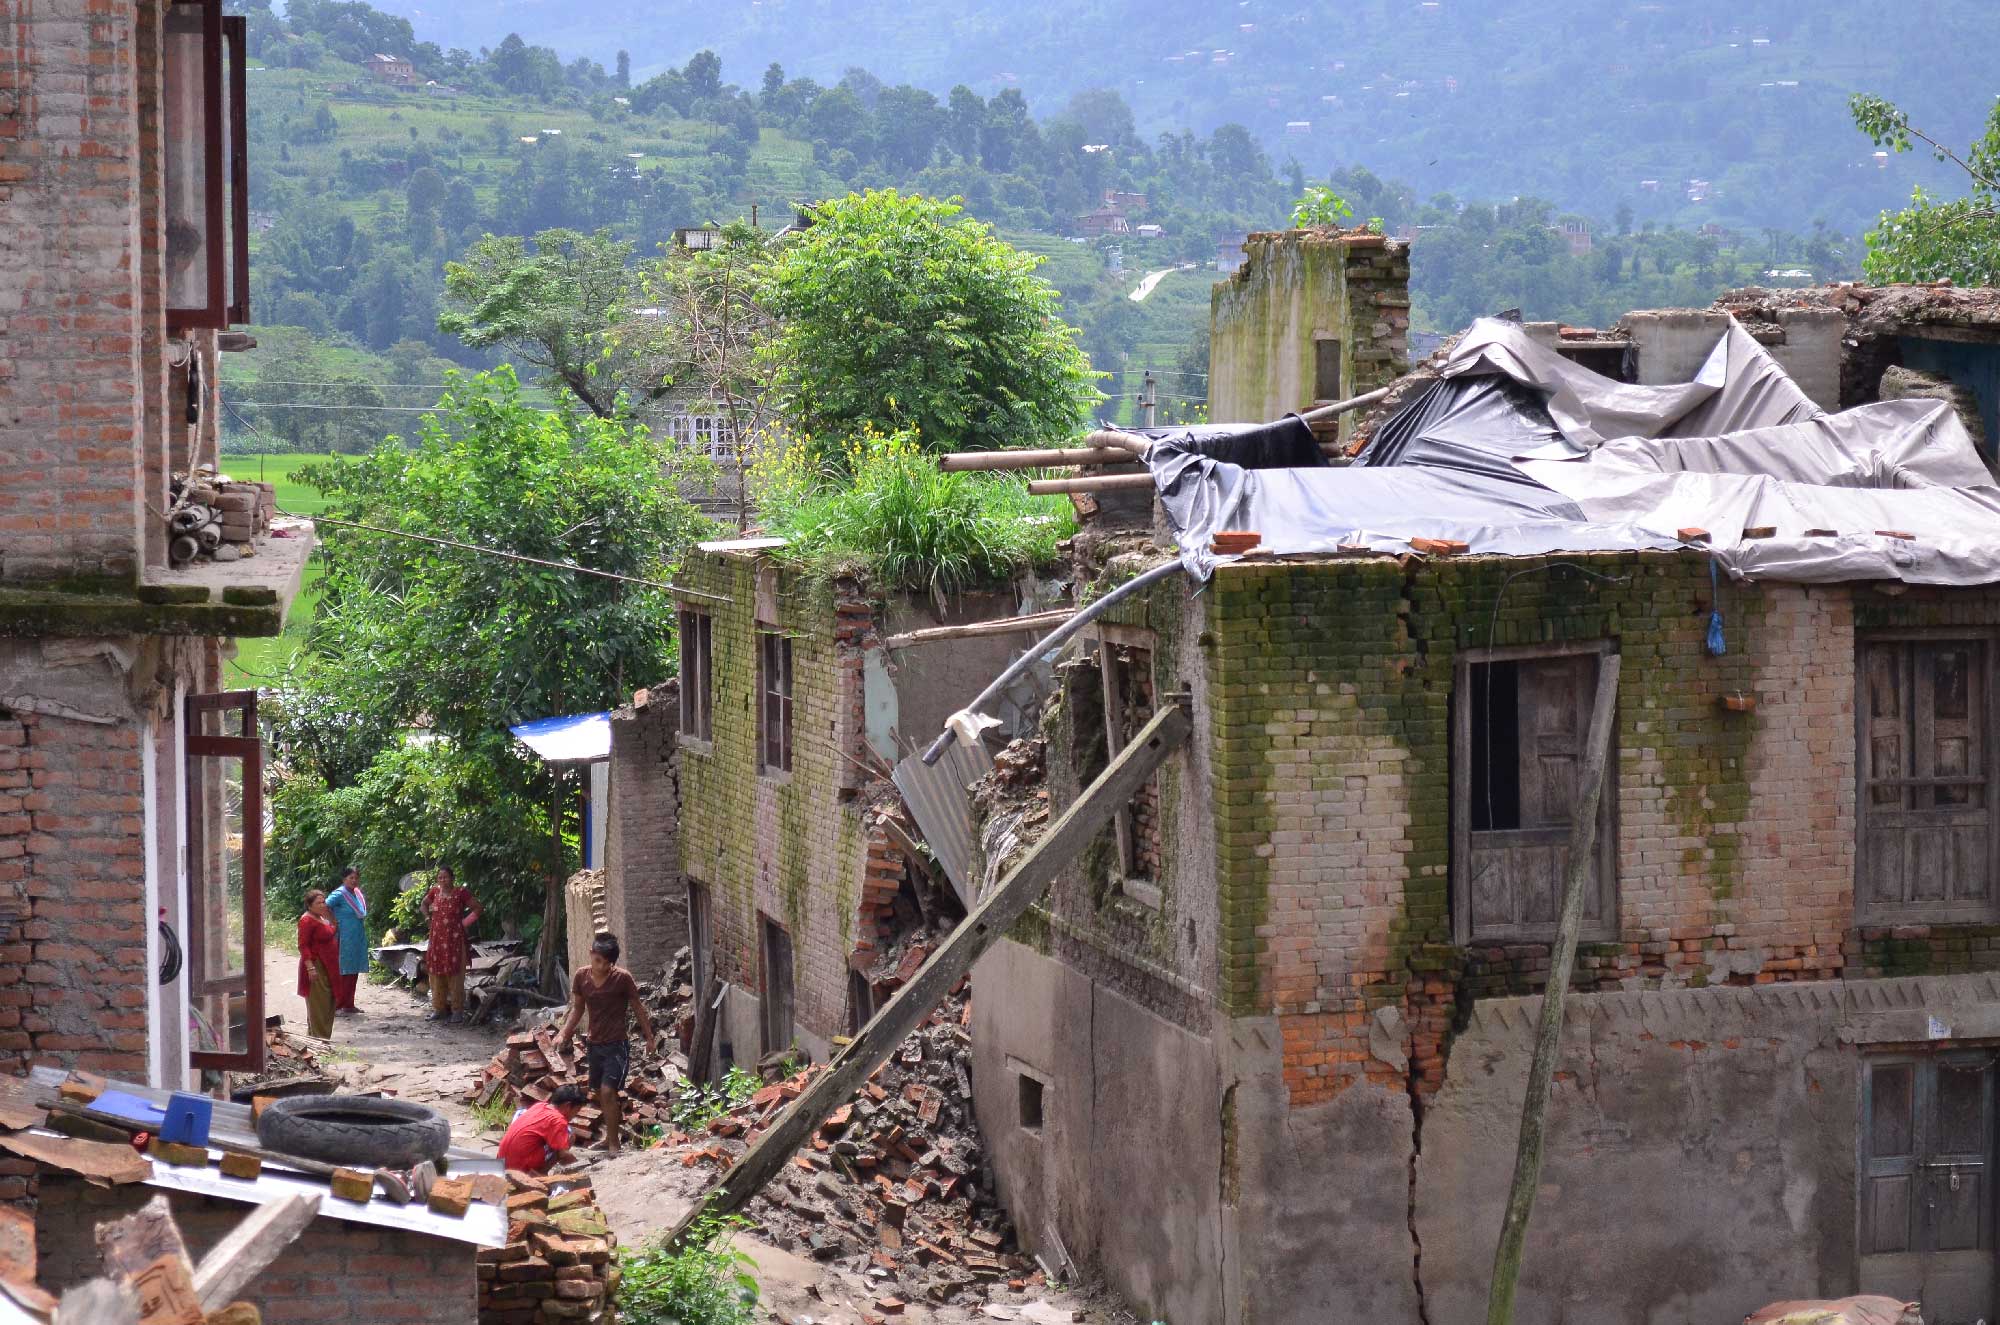 A view of Sankhu, one of the villages that suffered severe destruction in the Nepal earthquake. Photo: Pushkala Aripaka